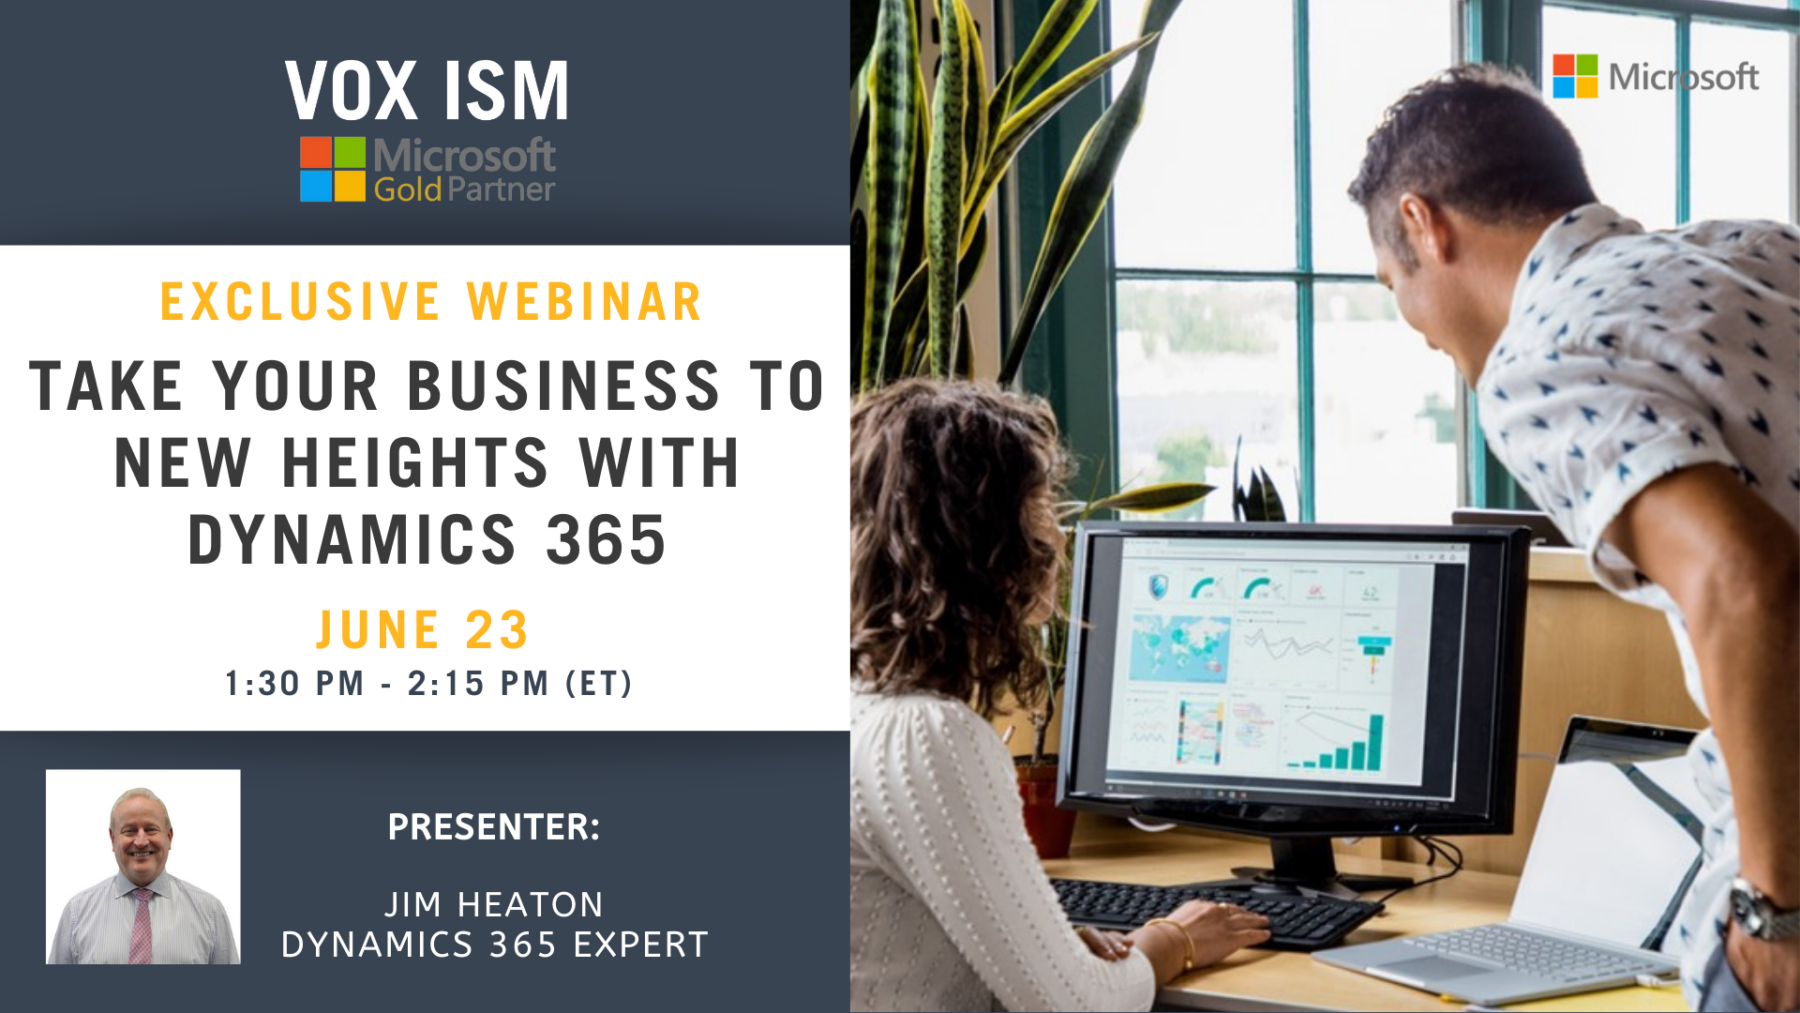 Take your business to new heights with Dynamics 365 - June 23 - Webinar - VOX ISM